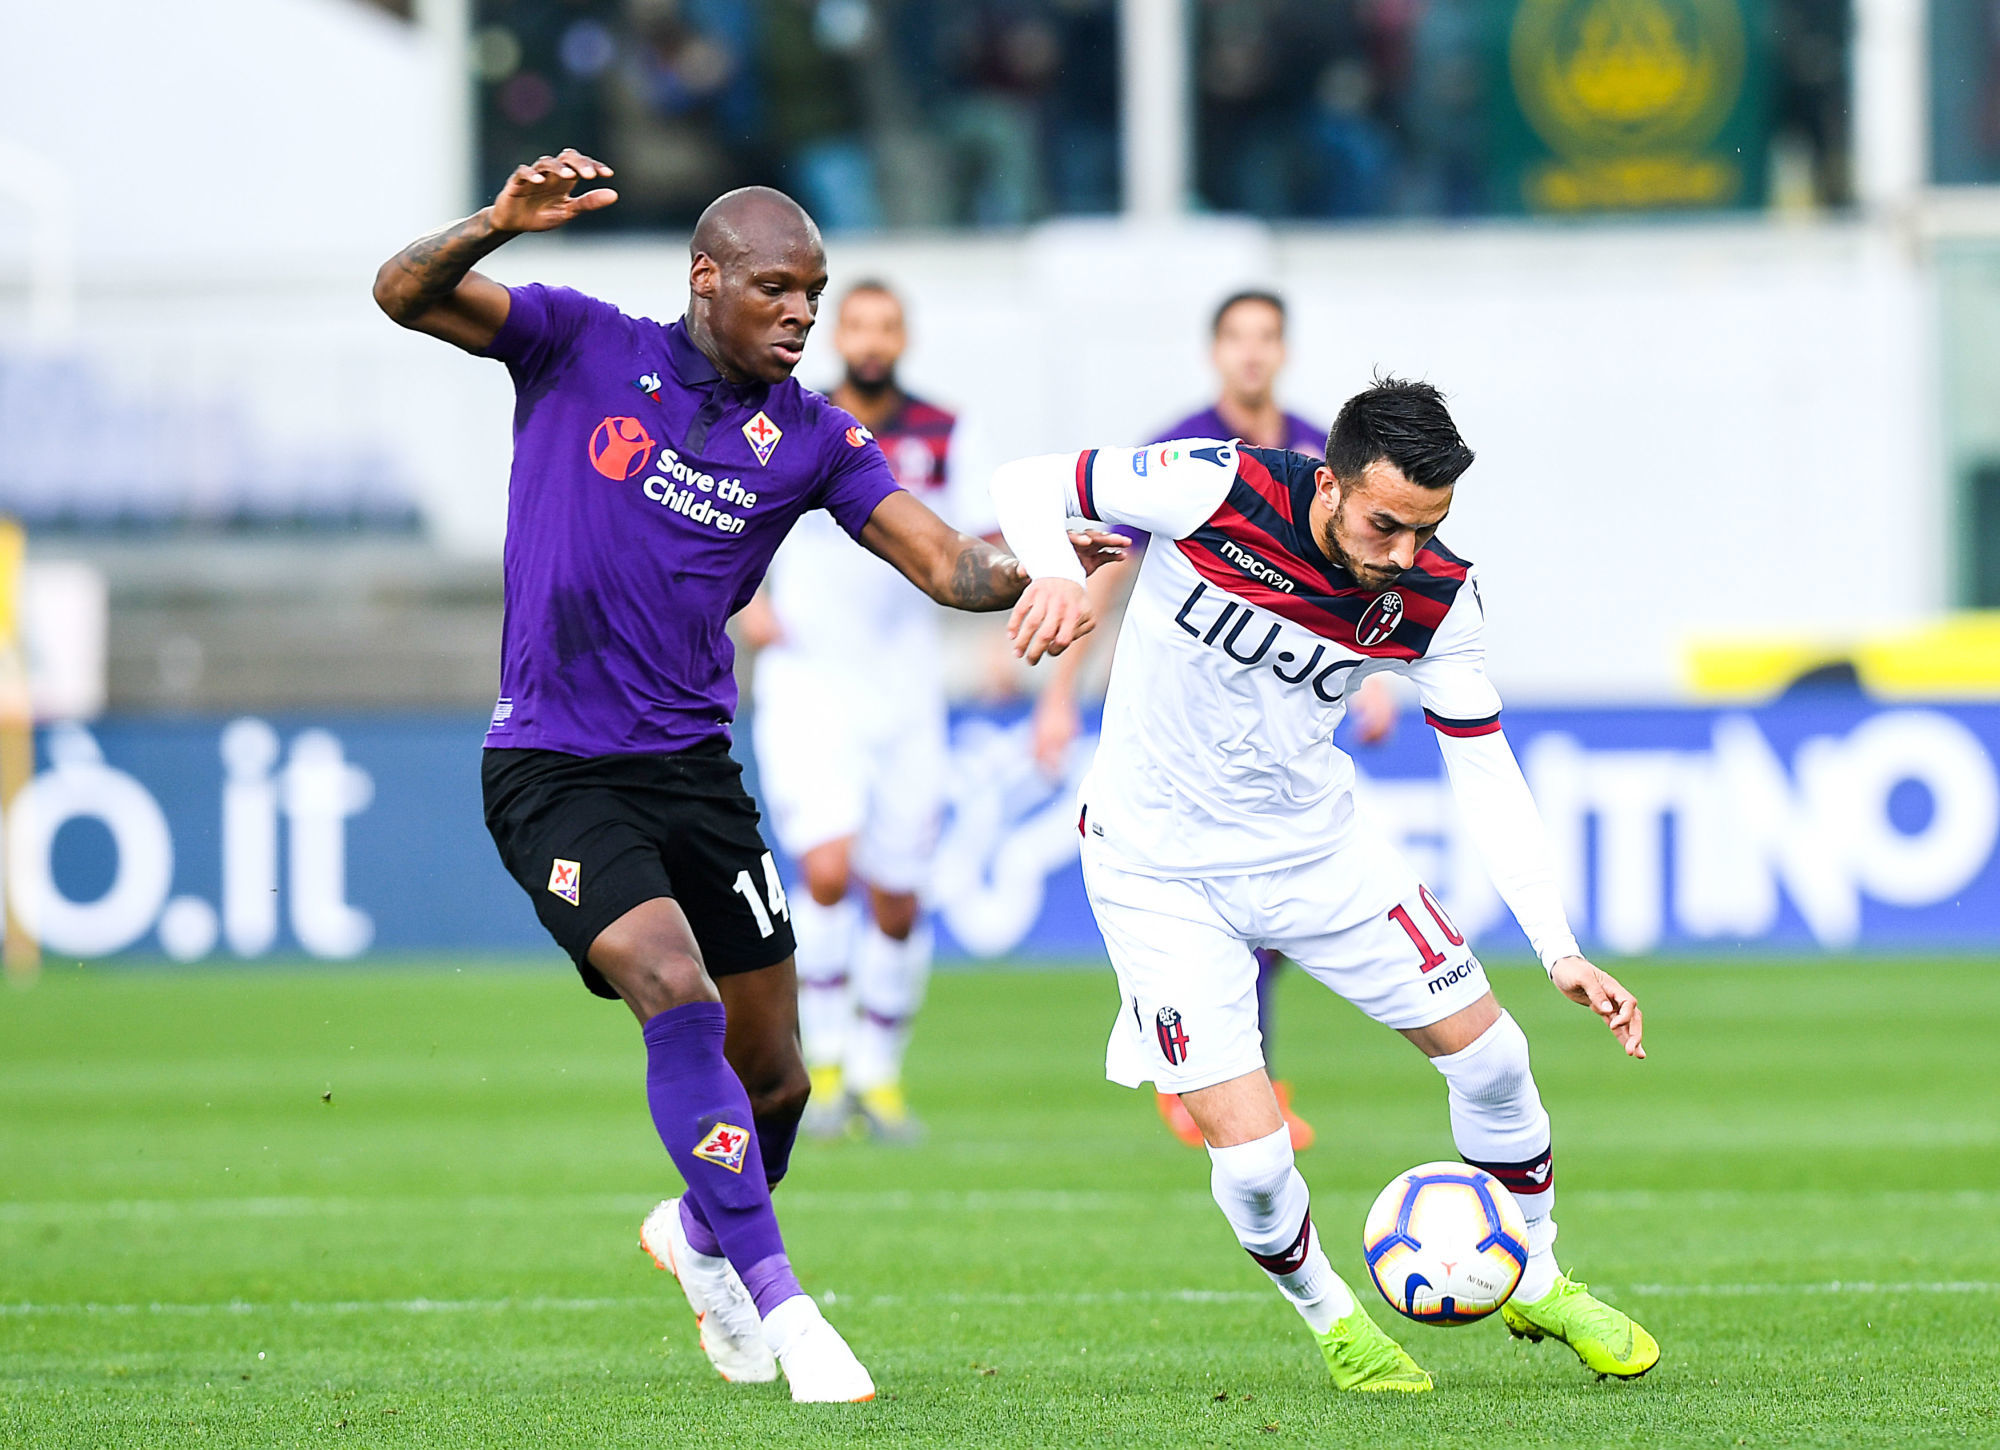 Nicola Sansone and Bryan Dabo during the Serie A match between Fiorentina and Bologna on April 14th, 2019.
Photo : LaPresse / Icon Sport